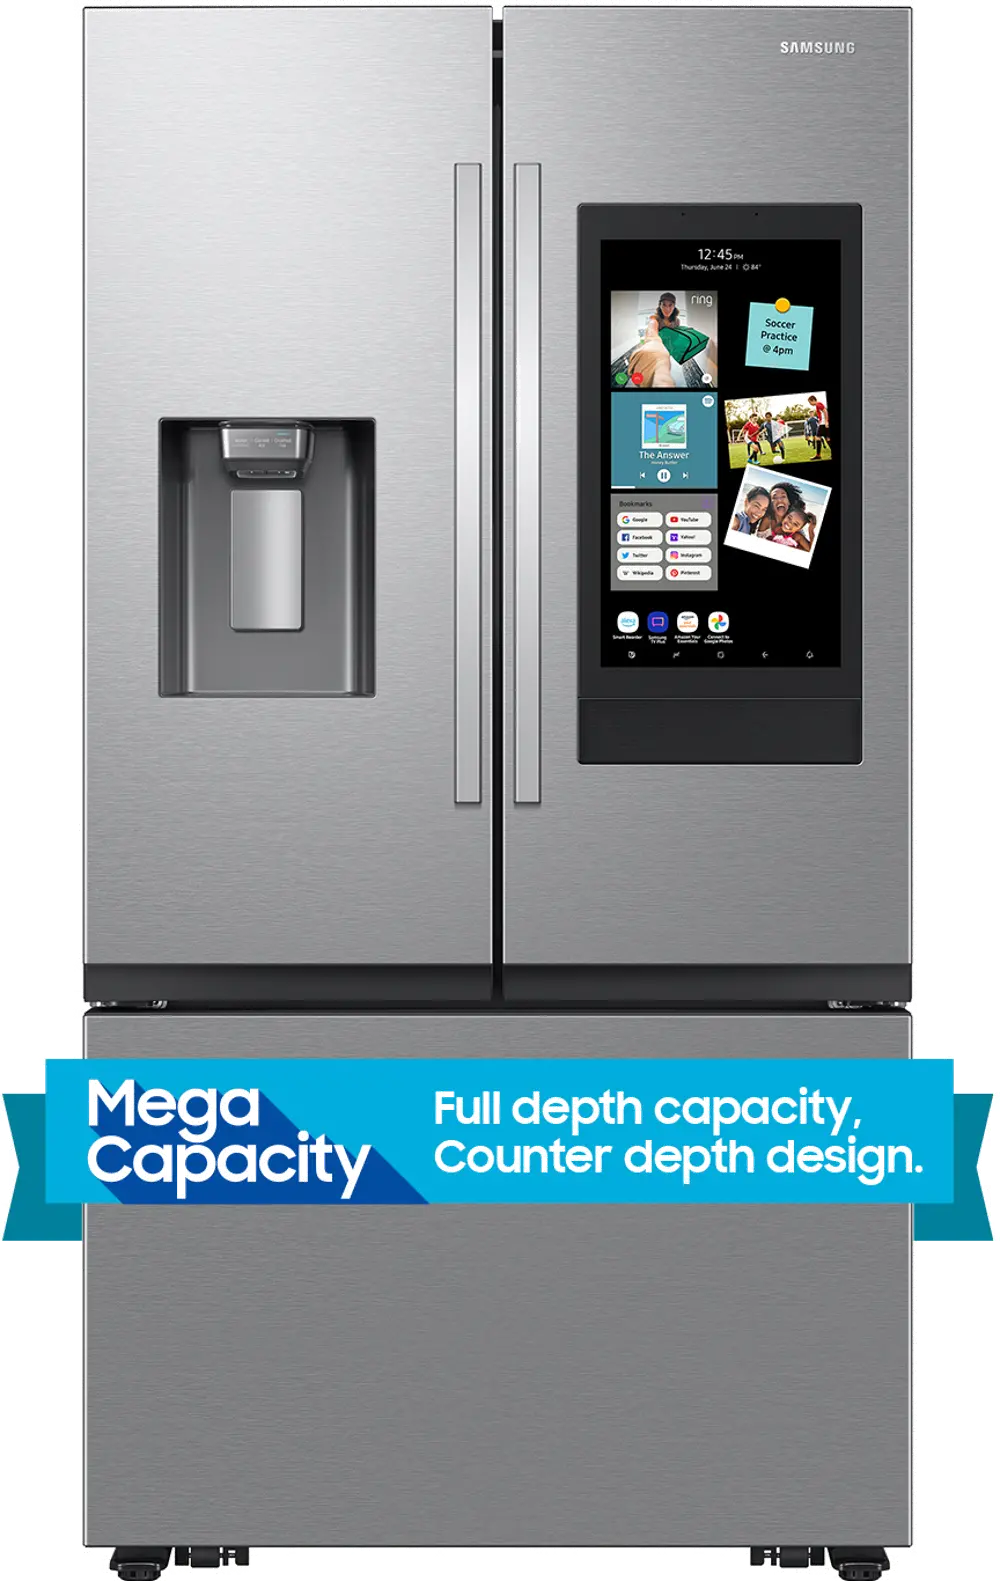 RF27CG5900SR Samsung 25 Cu Ft French Door Mega Capacity Refrigerator with Family Hub - Counter Depth Stainless Steel-1